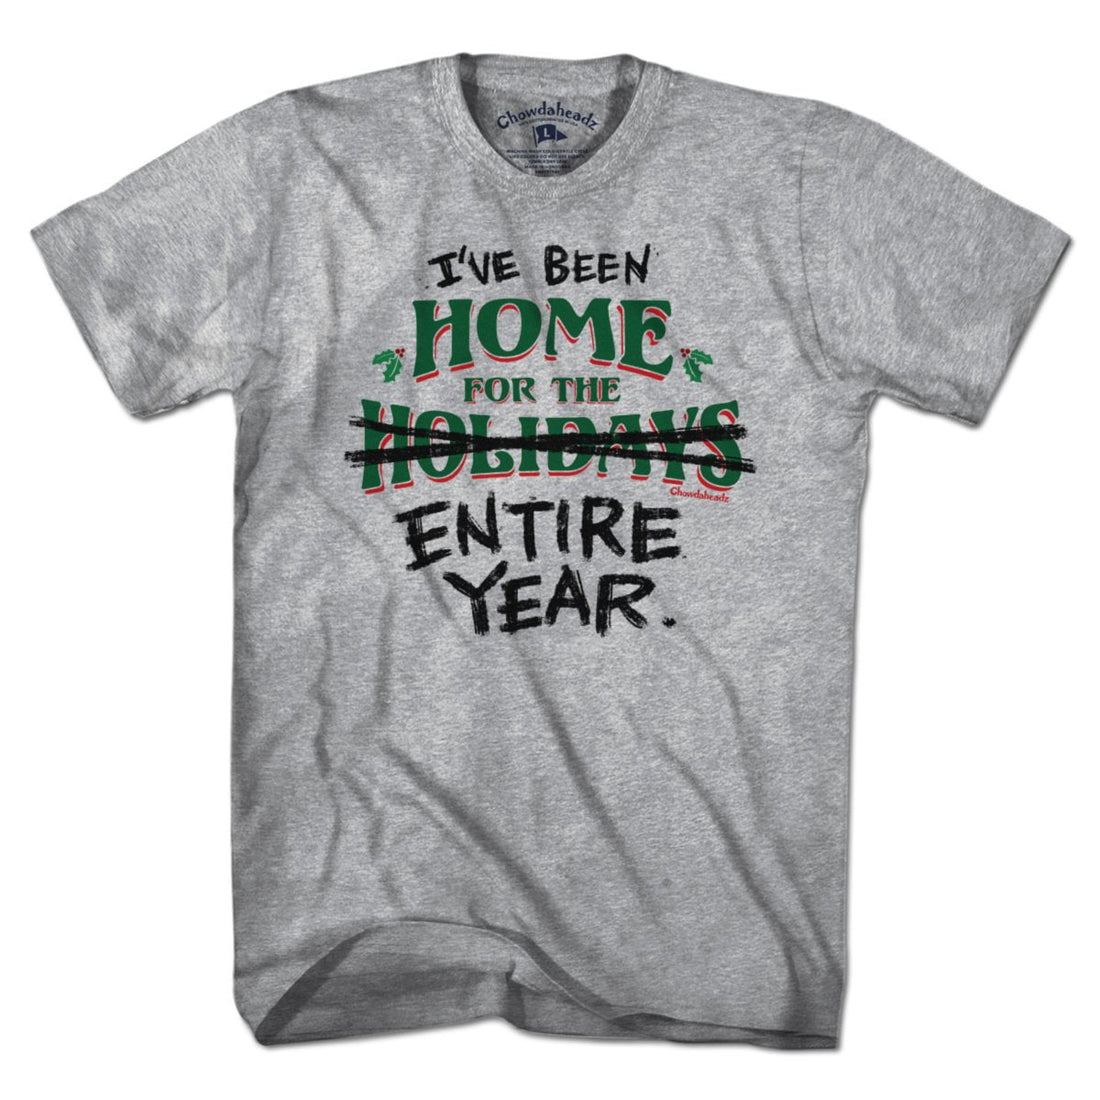 Home for the Holidays/Entire Year T-Shirt - Chowdaheadz